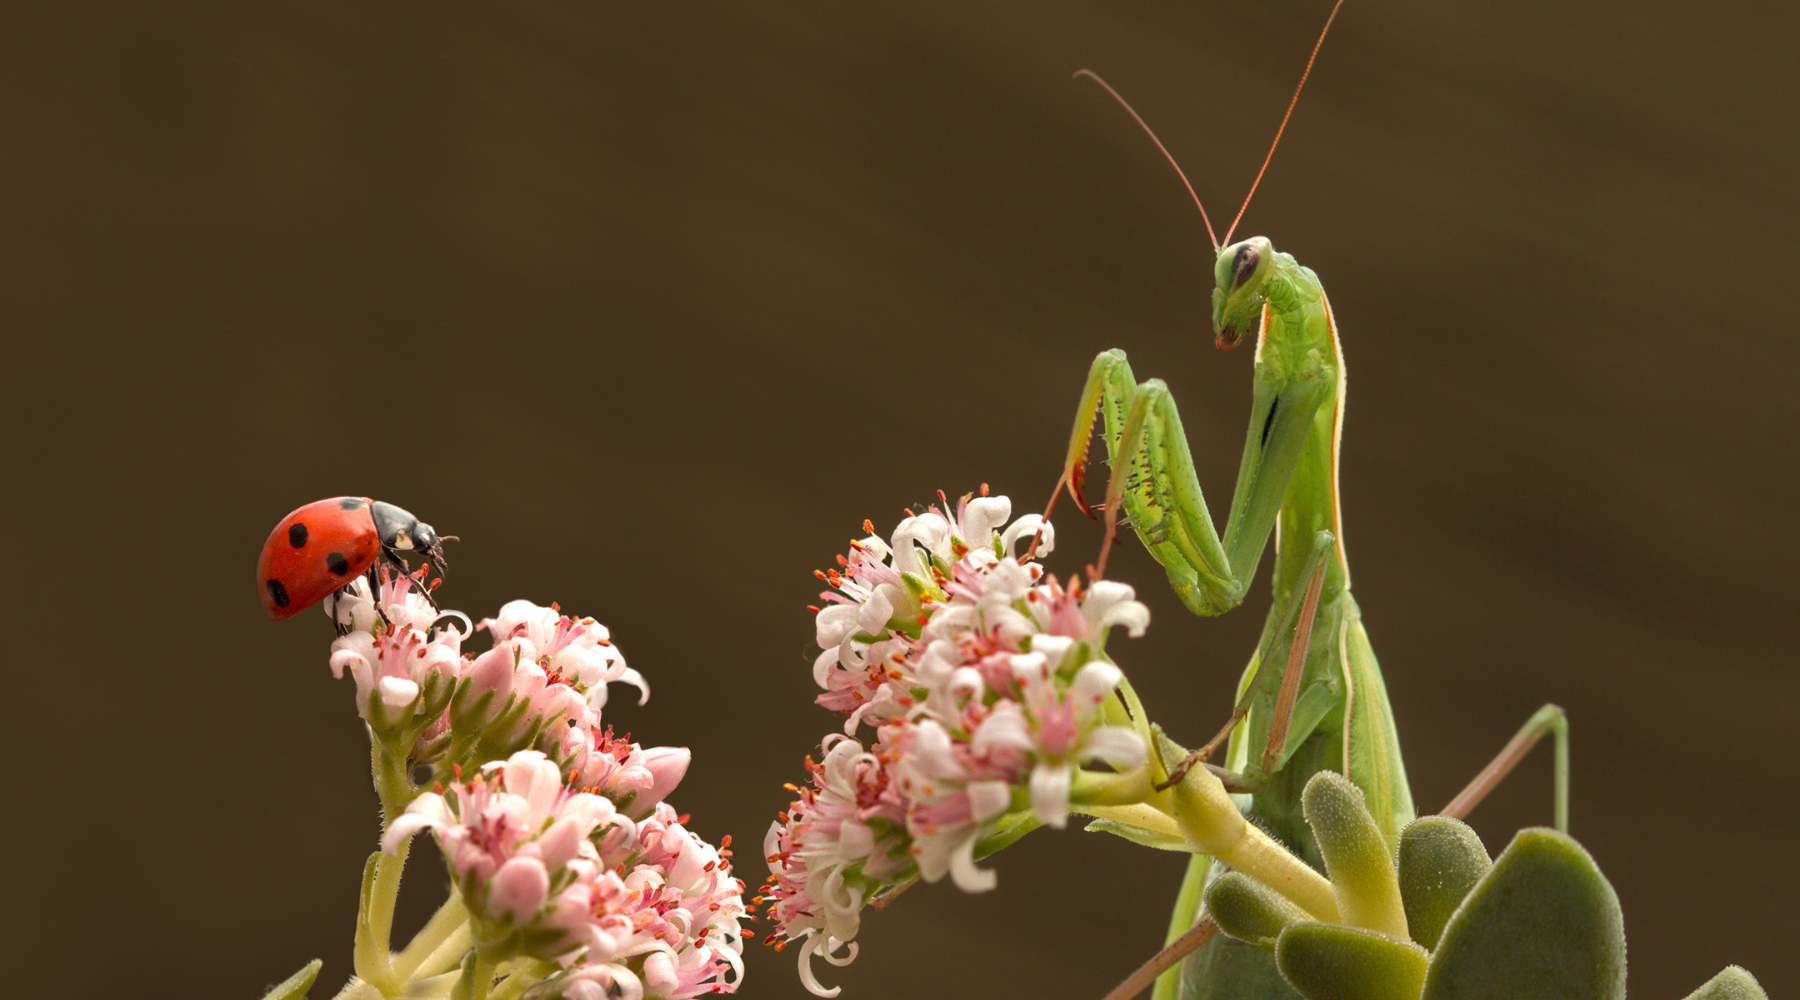 5 of the Most Beneficial Garden Insects